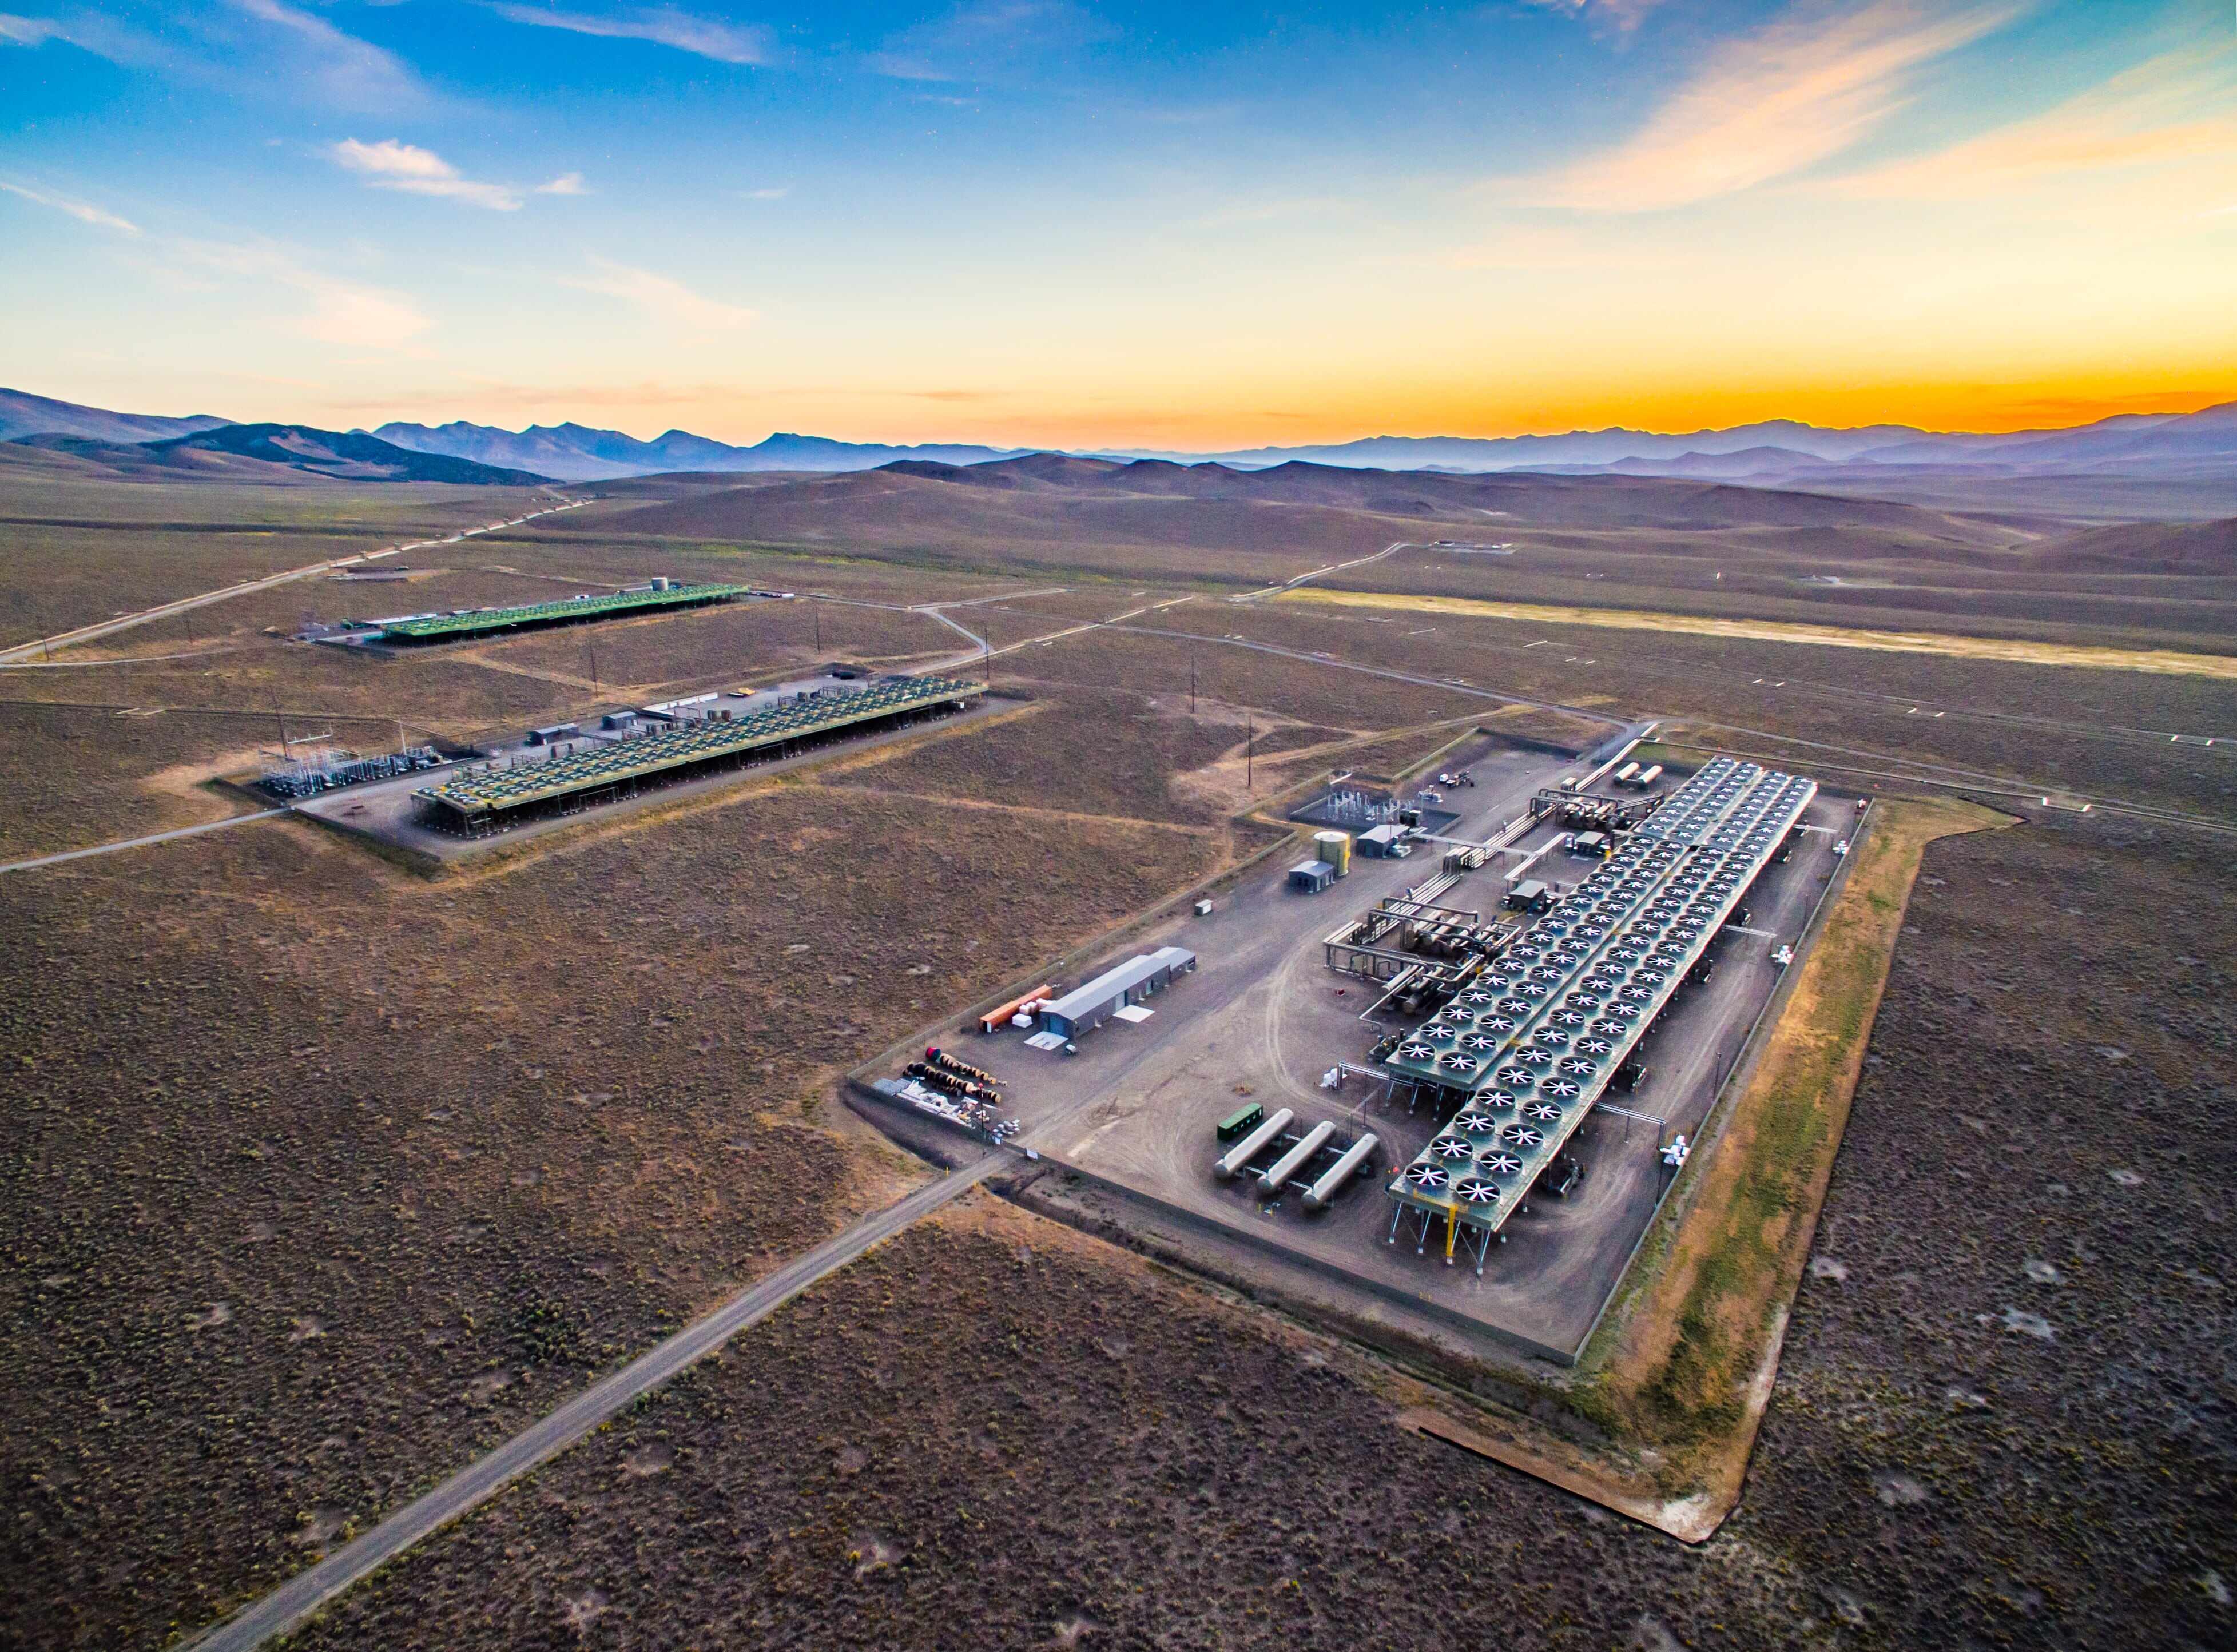 Aerial view of Ormat Technologies McGinness Hills Complex 146 MW geothermal plant in Nevada.